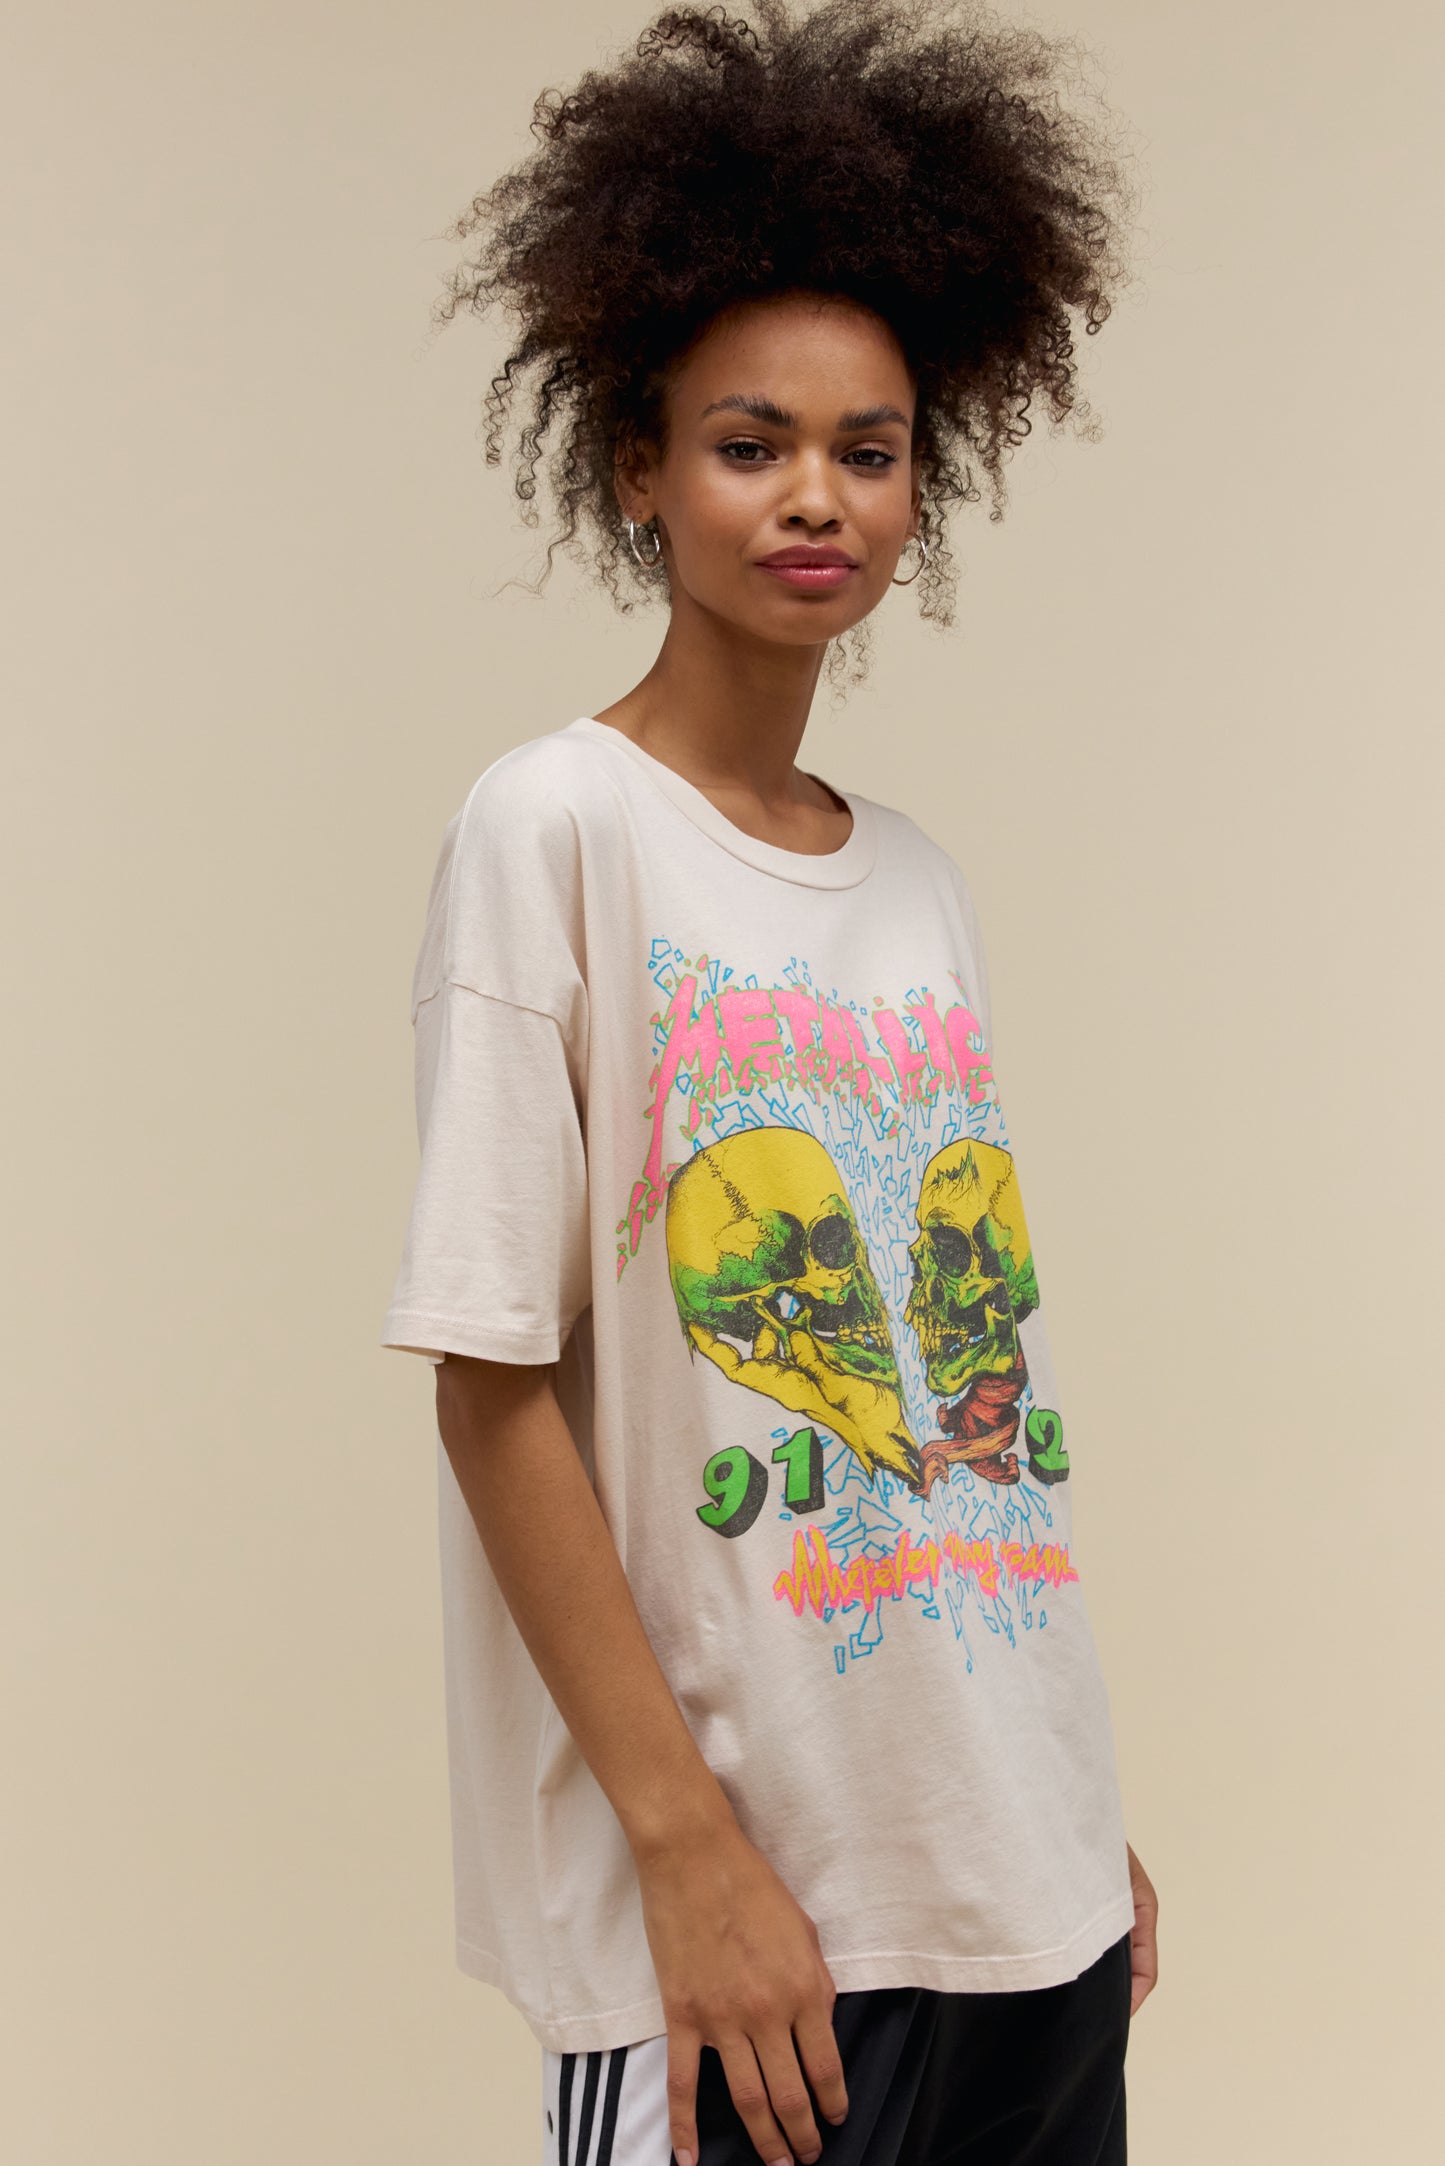 Model wearing an oversized Metallica 'Wherever I May Roam' graphic tee in dirty white with skull artwork